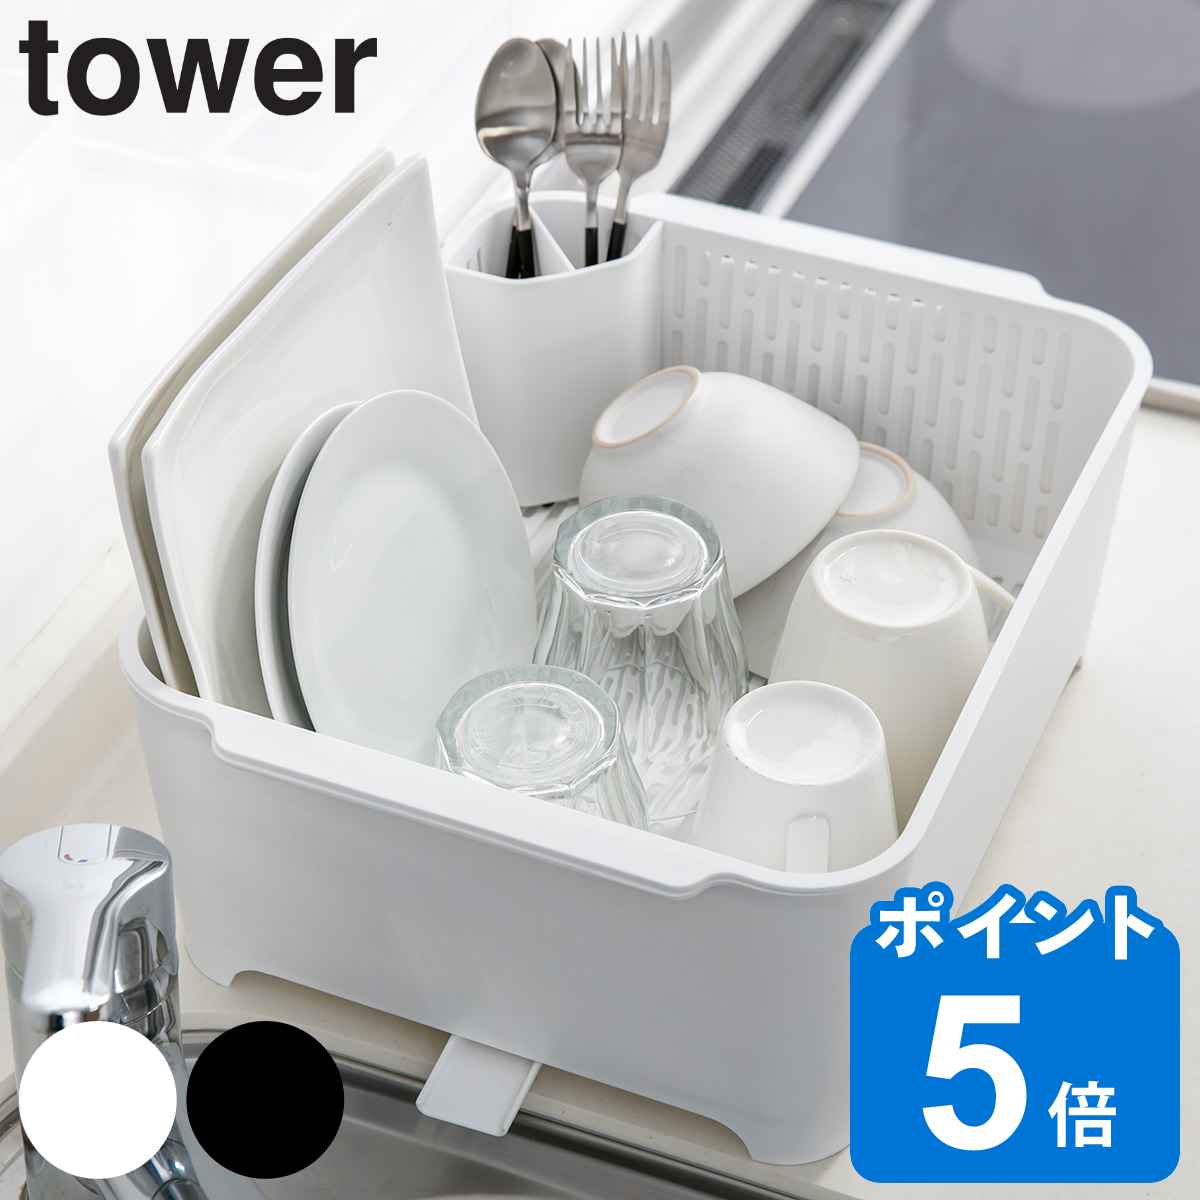 tower 水切りセット タワー